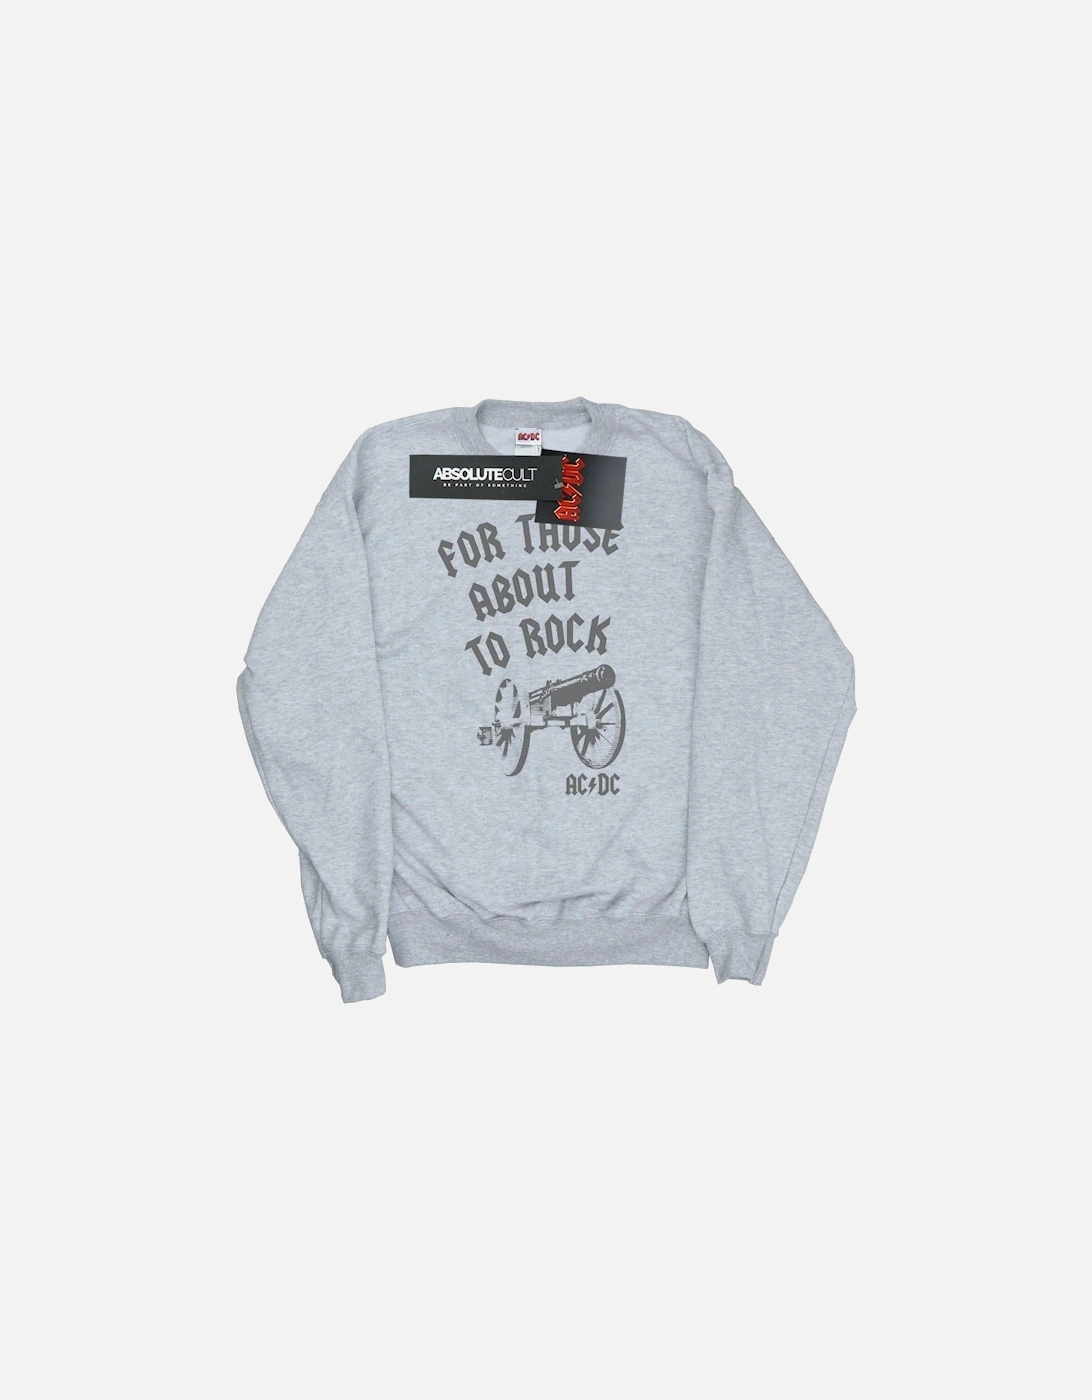 Womens/Ladies For Those About To Rock Cannon Sweatshirt